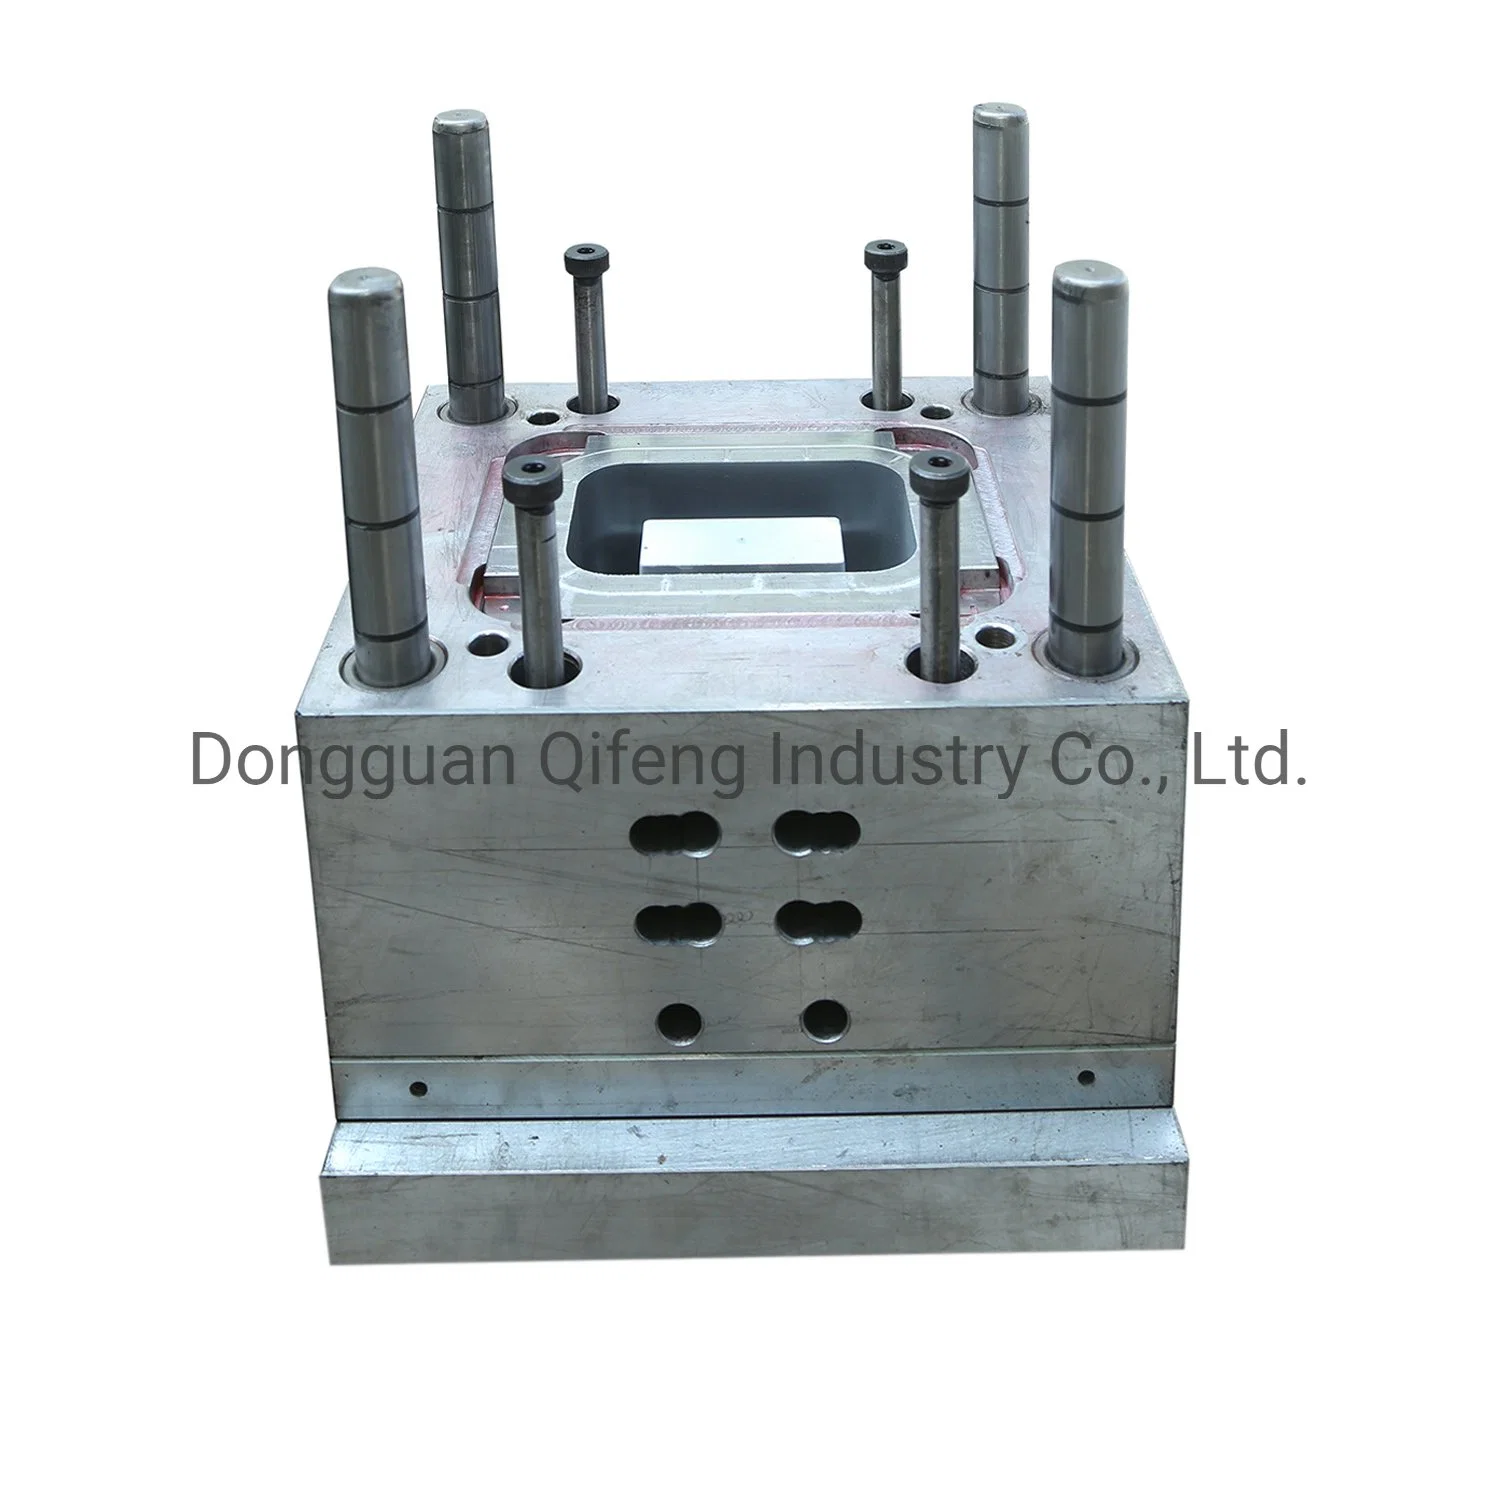 Custom Plastic Injection Molding Company Supply Hotsales Injection Tooling Matrix Mold Spare Parts Consumer Products Extrusion Service and OEM Assembly